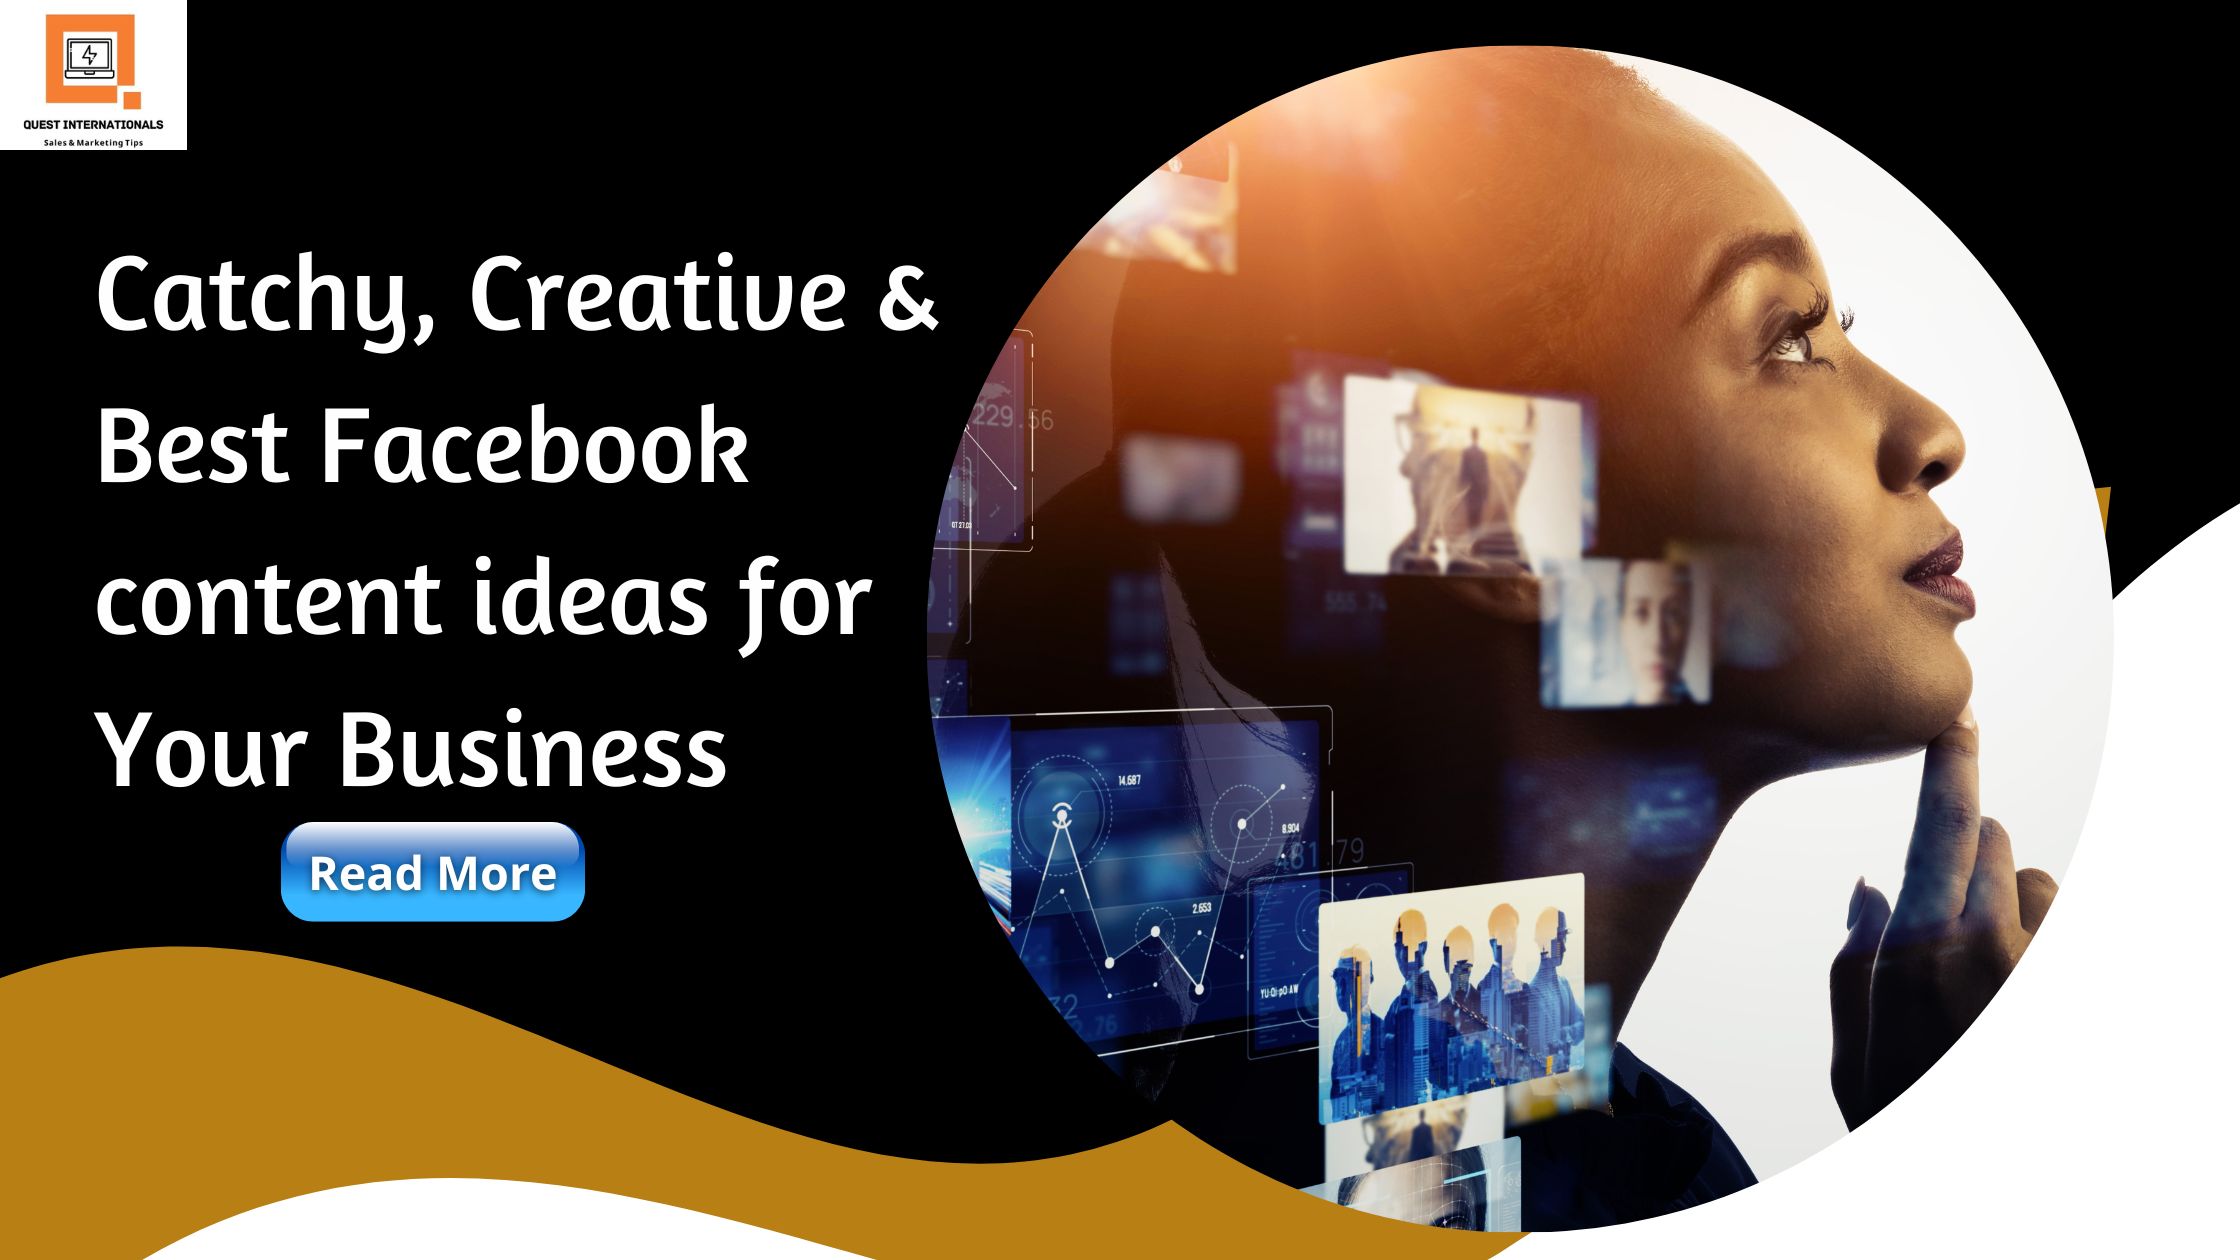 You are currently viewing Catchy, Creative & Best Facebook content ideas for Your Business